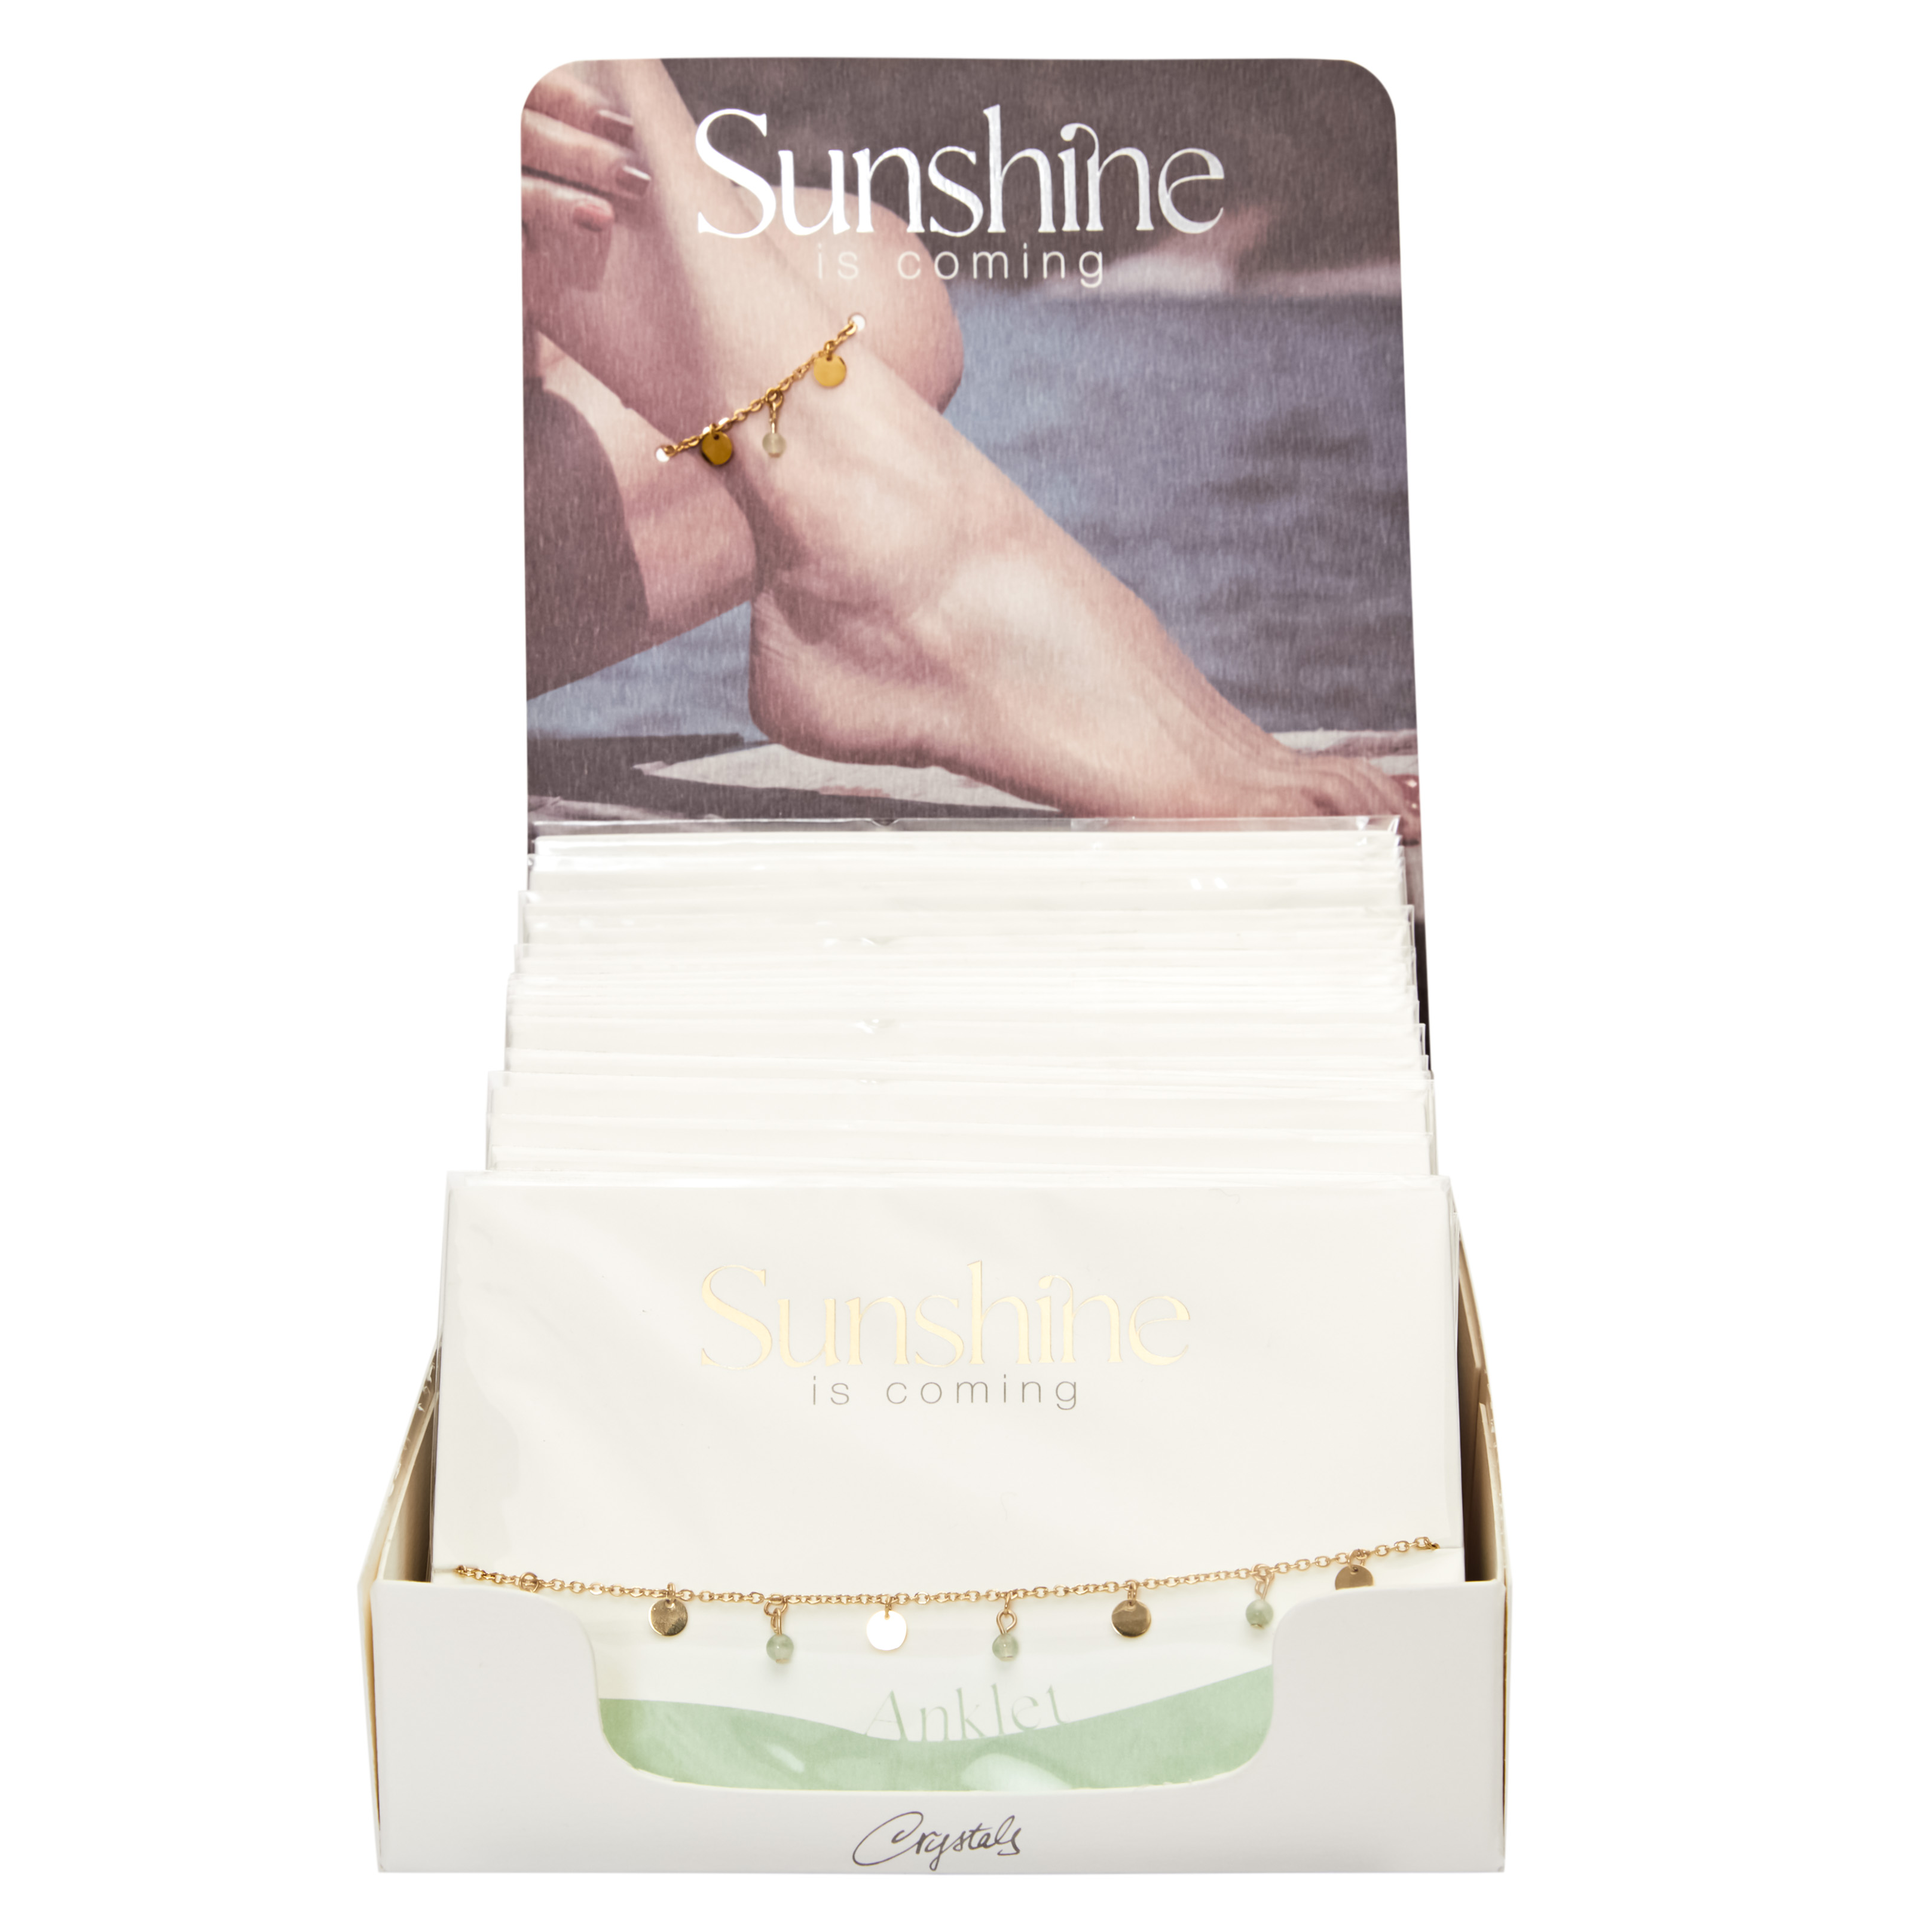 Display anklets "Sunshine is coming"